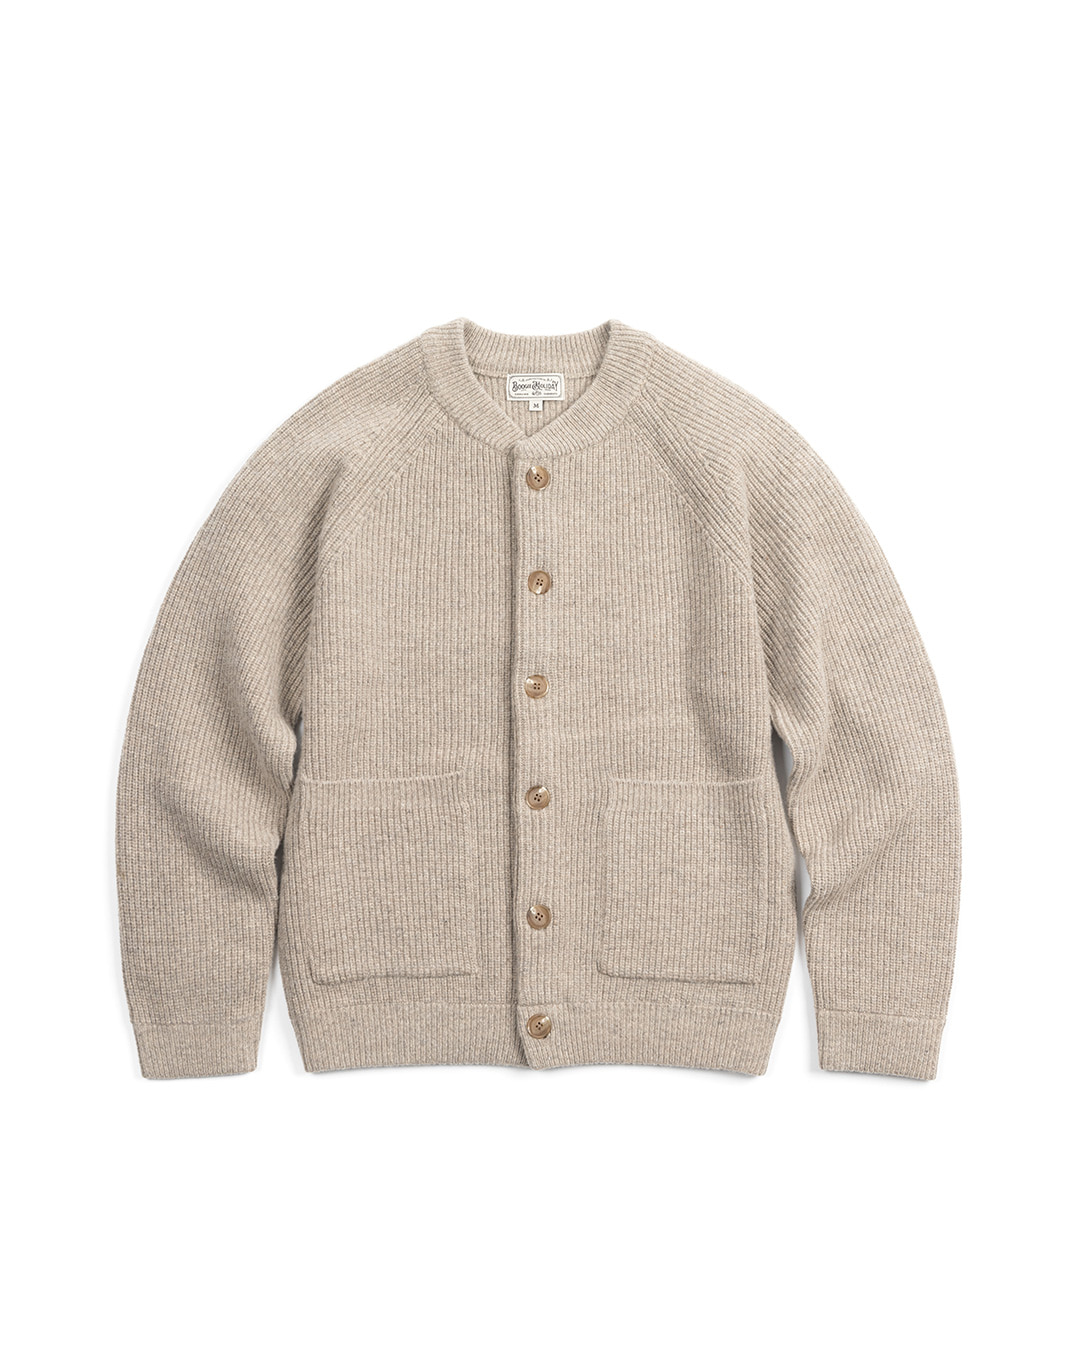 04 LAMBSWOOL ROUND NECK CARDIGAN (oatmeal)